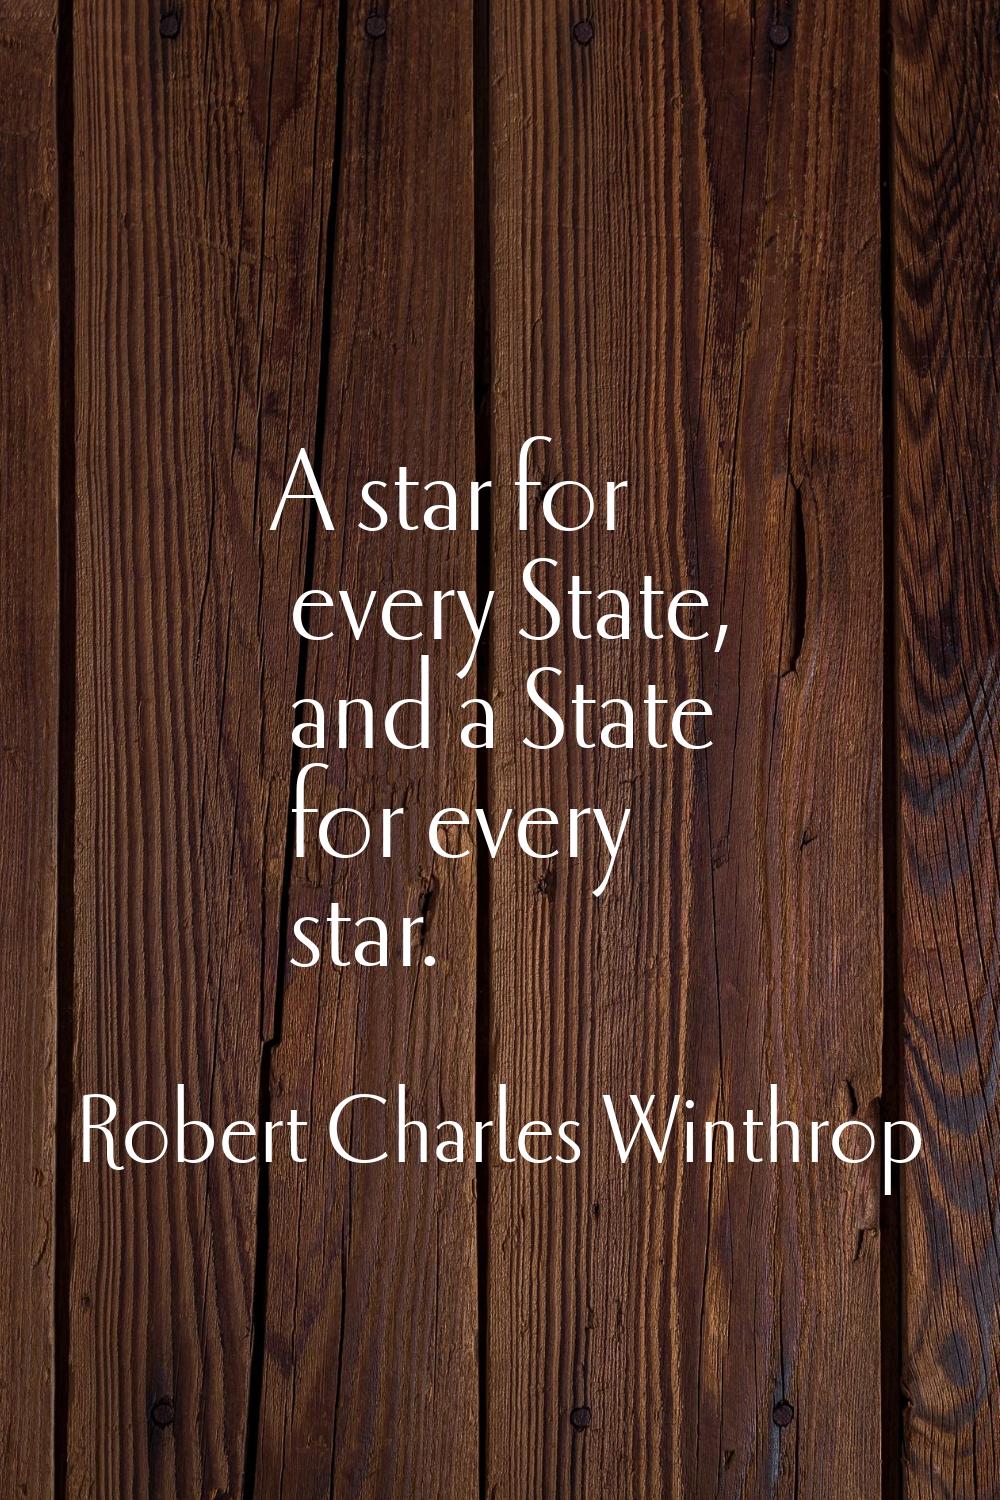 A star for every State, and a State for every star.